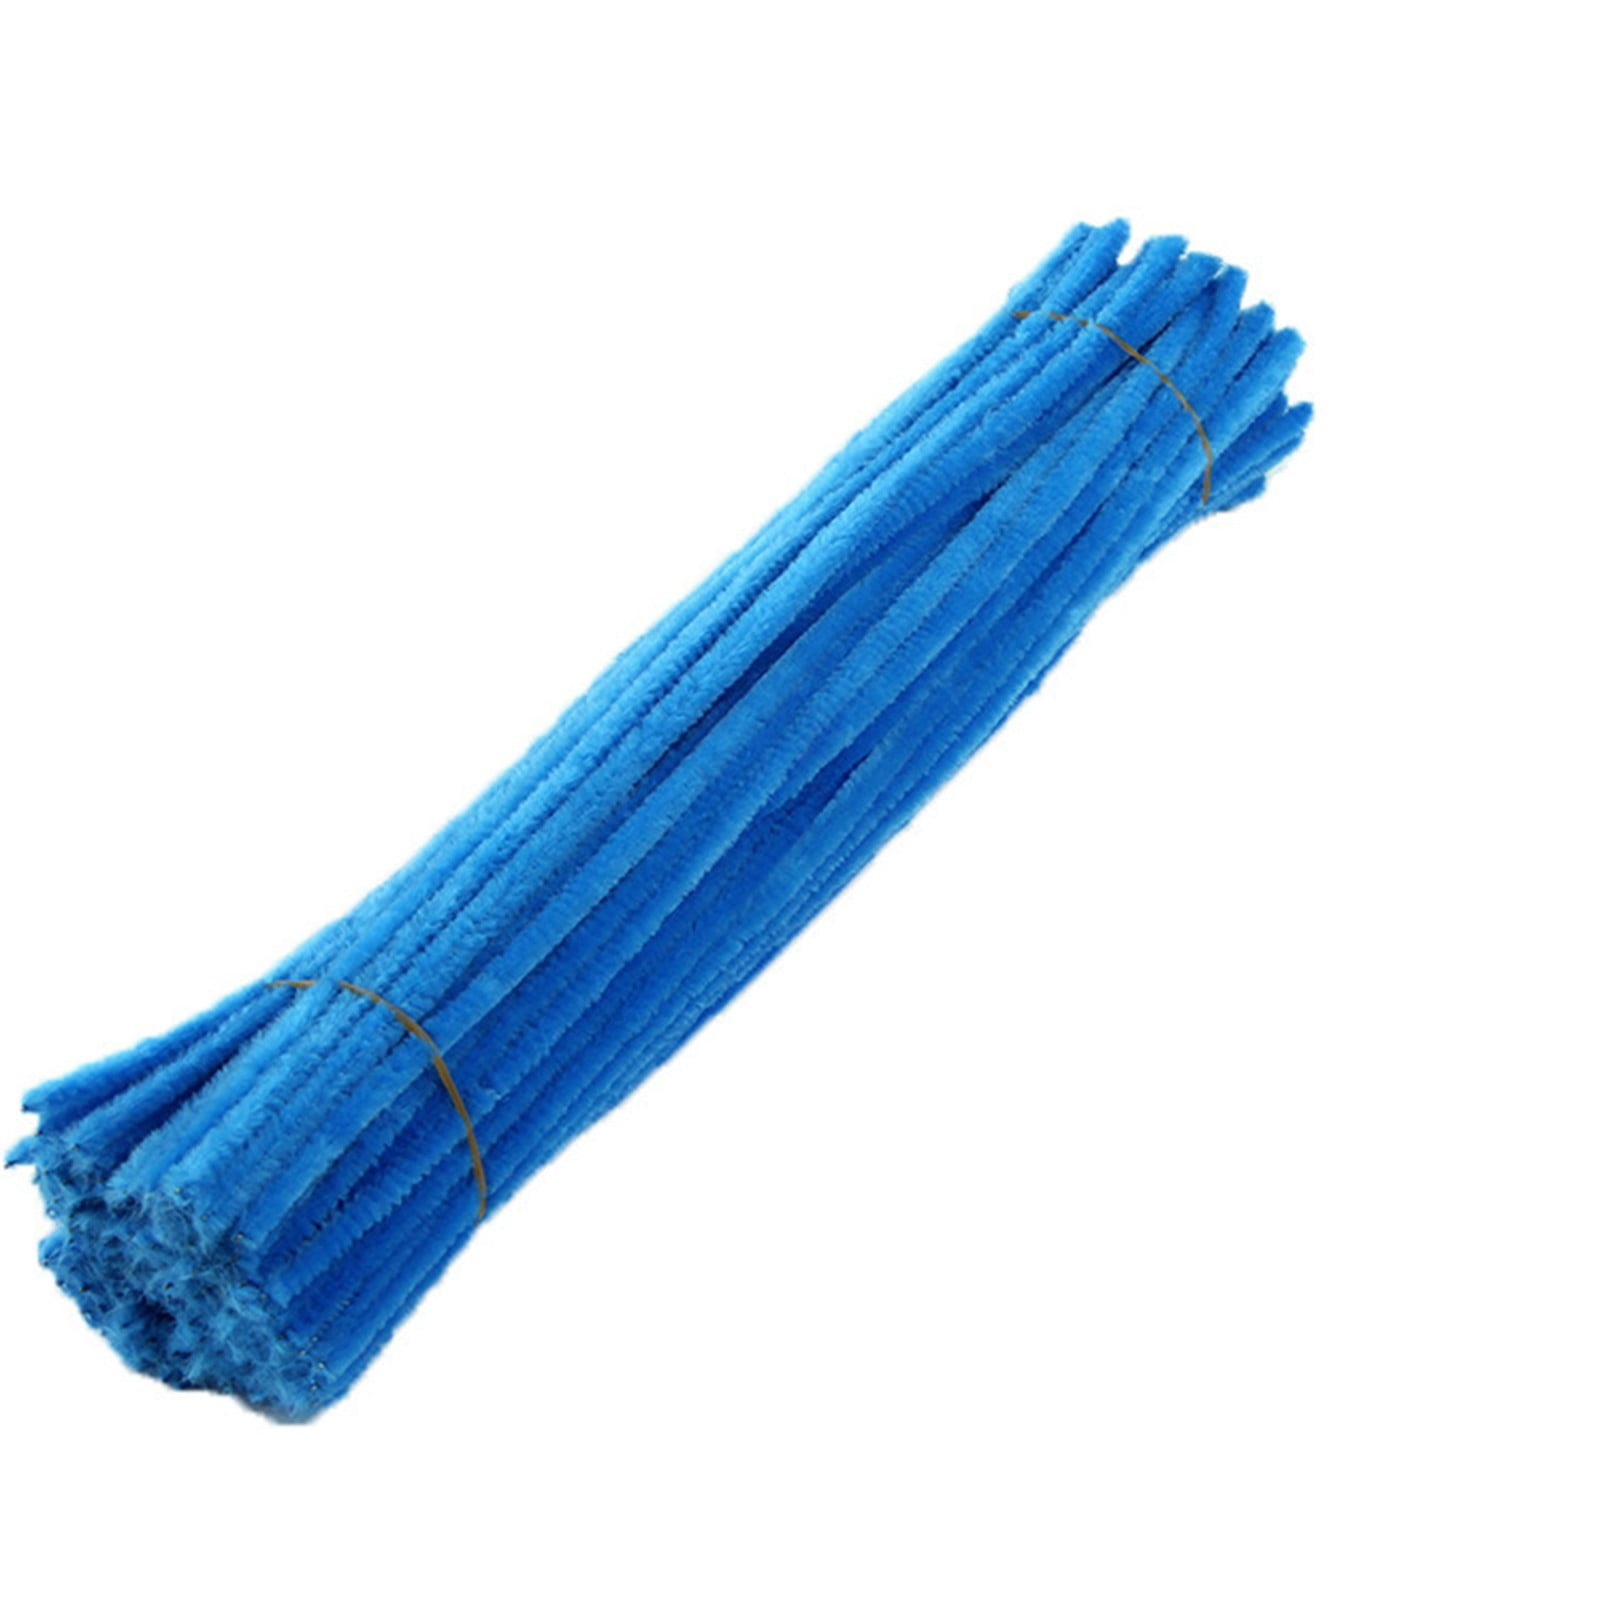 Just Artifacts Chenille Stem Pipe Cleaners for Arts and Crafts (100pcs, Light Blue)